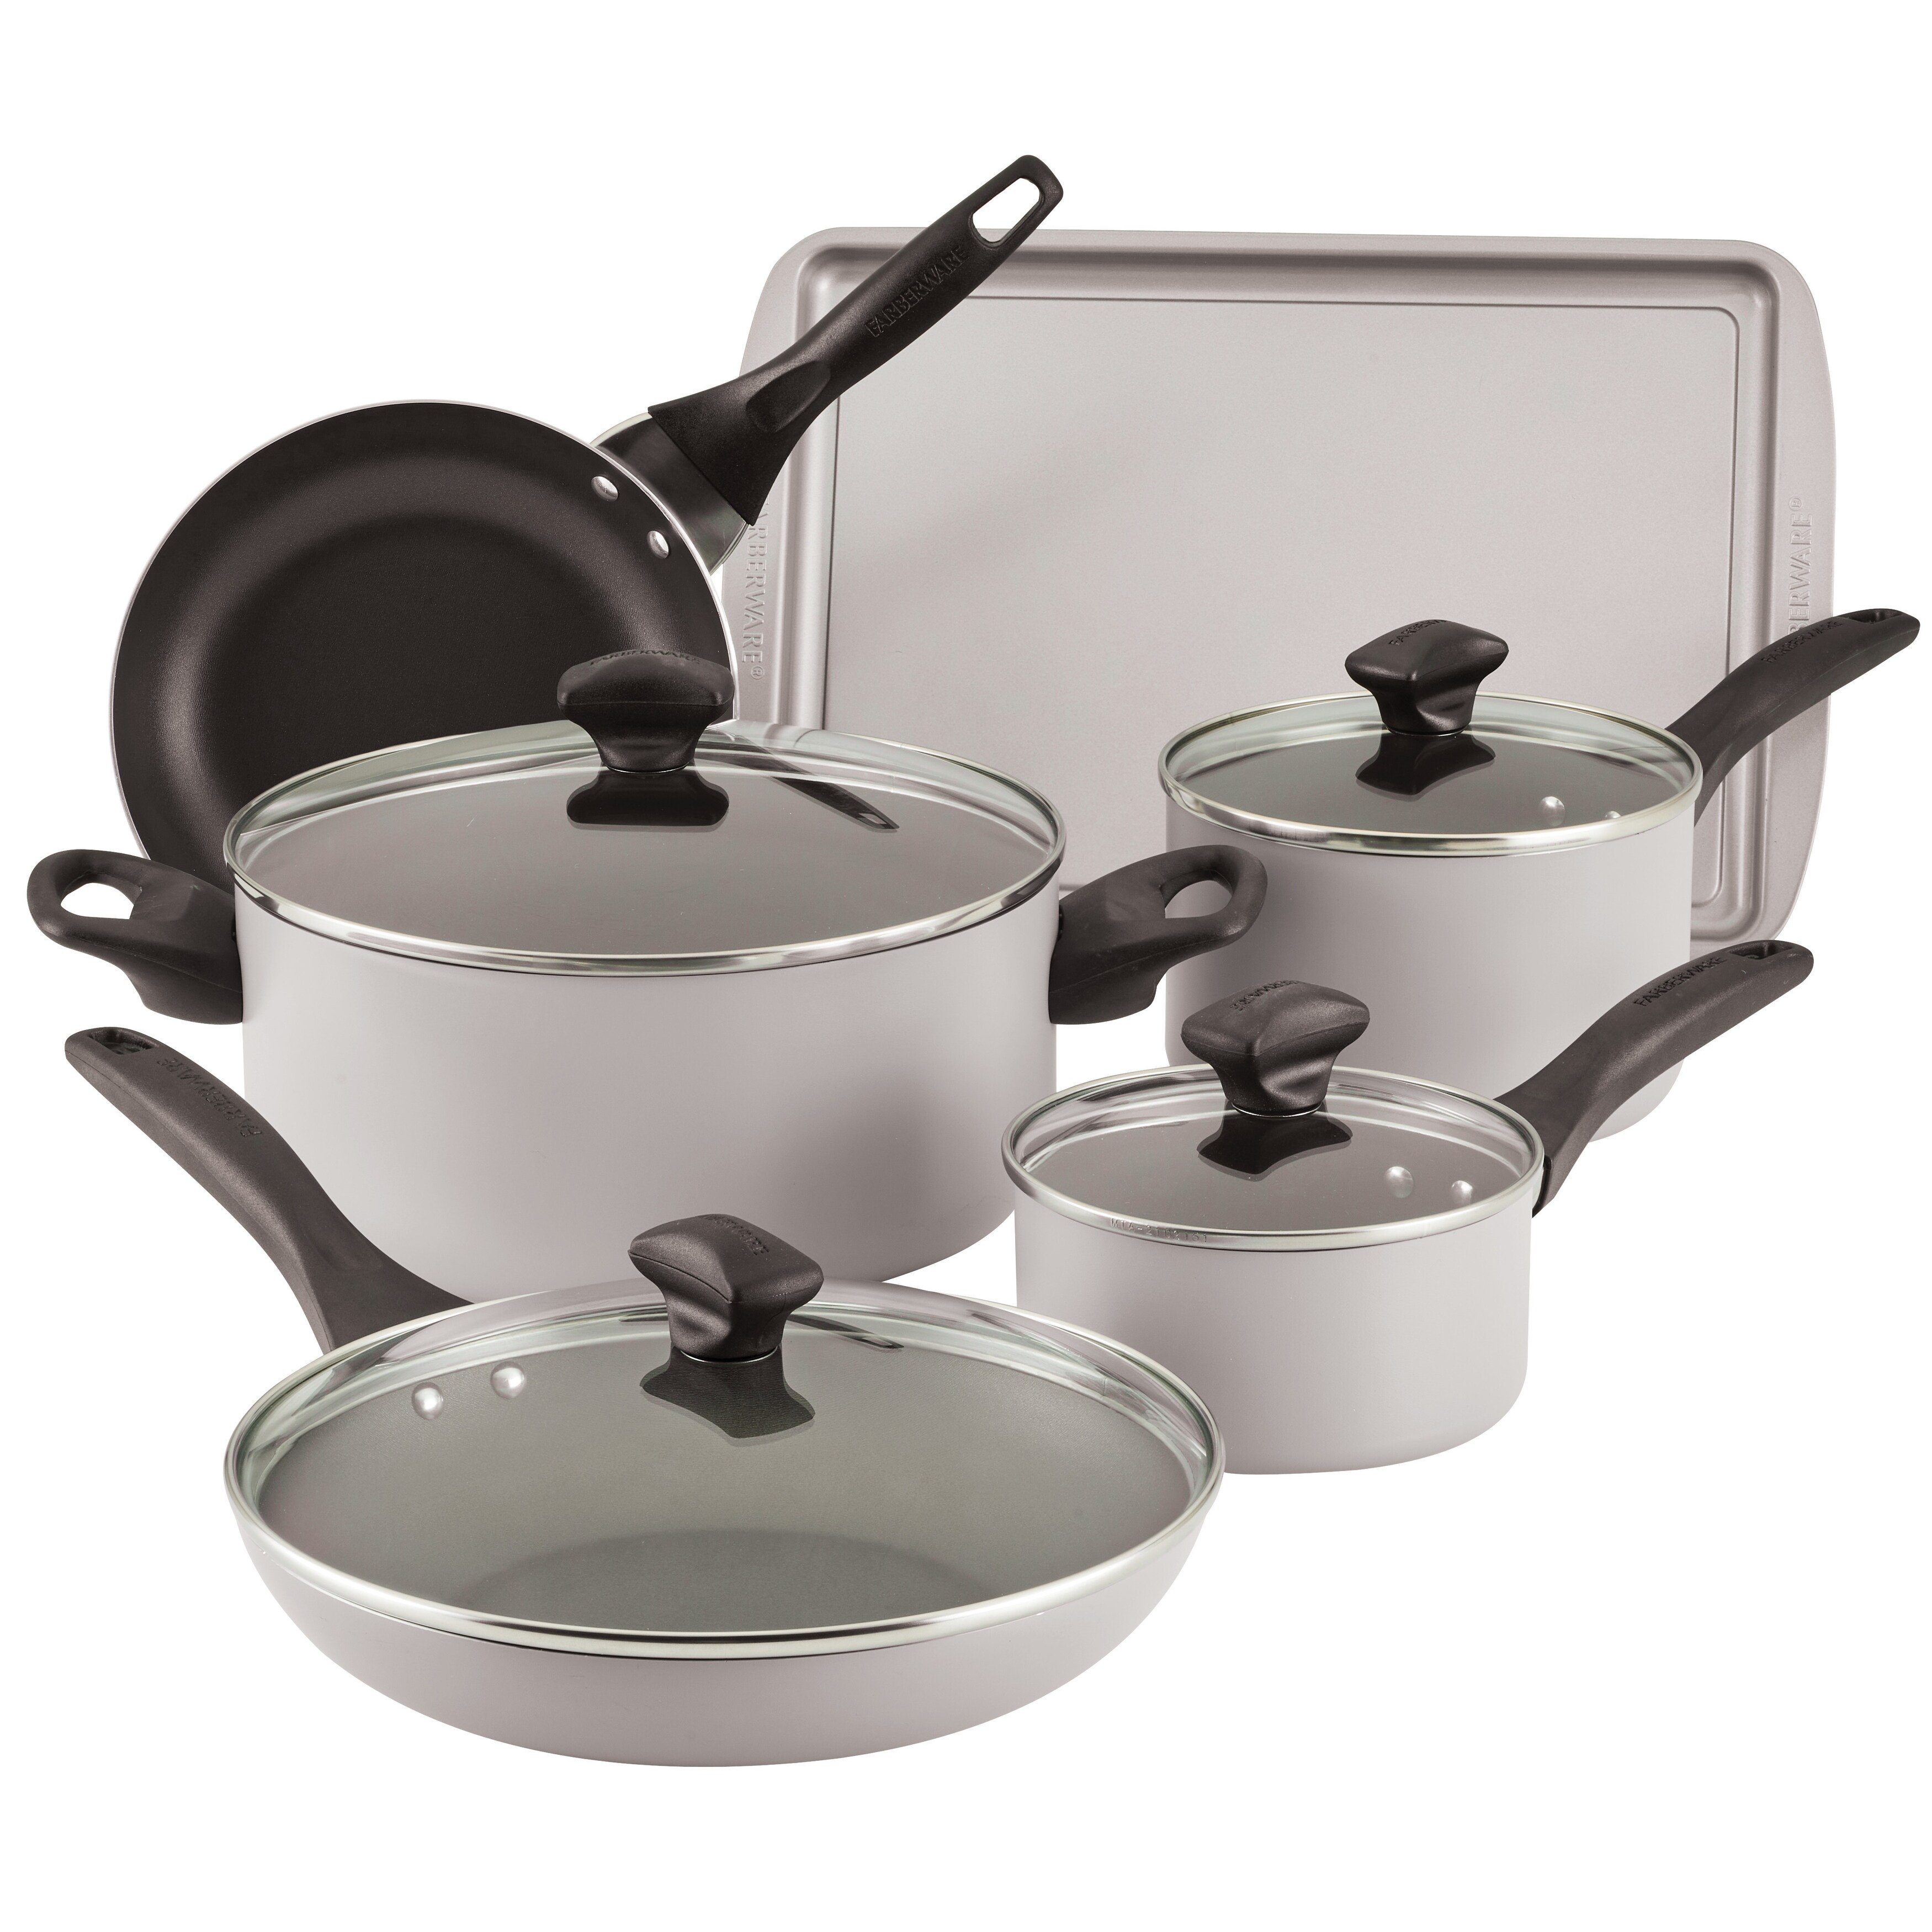 https://ak1.ostkcdn.com/images/products/is/images/direct/c62860f57dc4cd05c29c5dbf86a8d0e0adaee163/Farberware-Dishwasher-Safe-Aluminum-Nonstick-Cookware-Pots-and-Pans-Set%2C-15-Piece%2C-Champagne.jpg